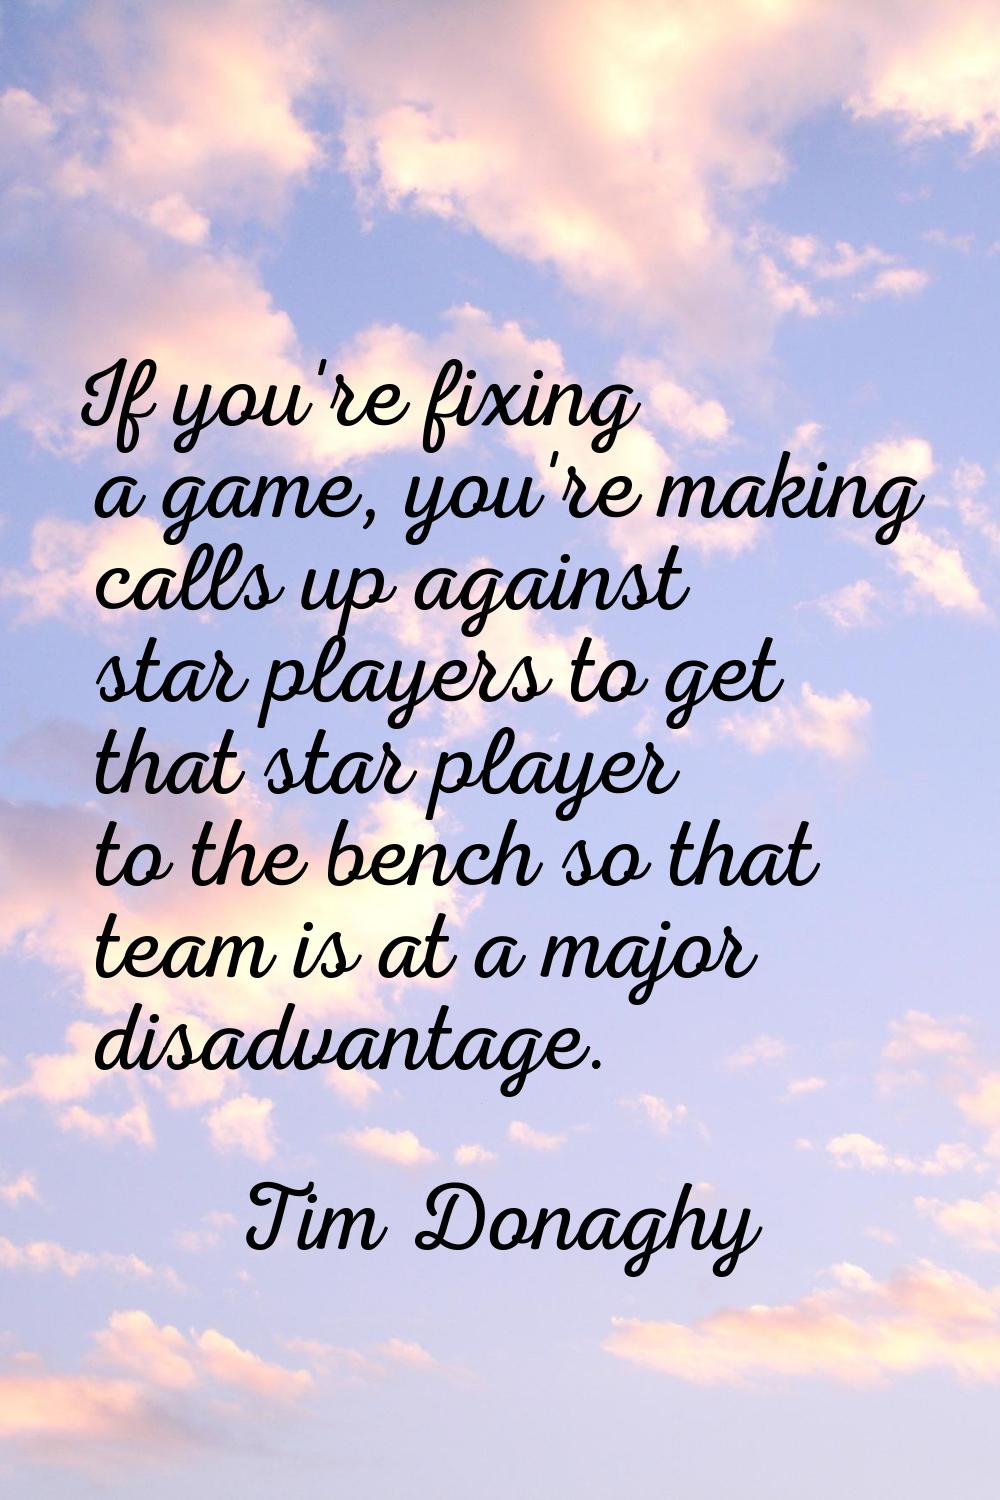 If you're fixing a game, you're making calls up against star players to get that star player to the